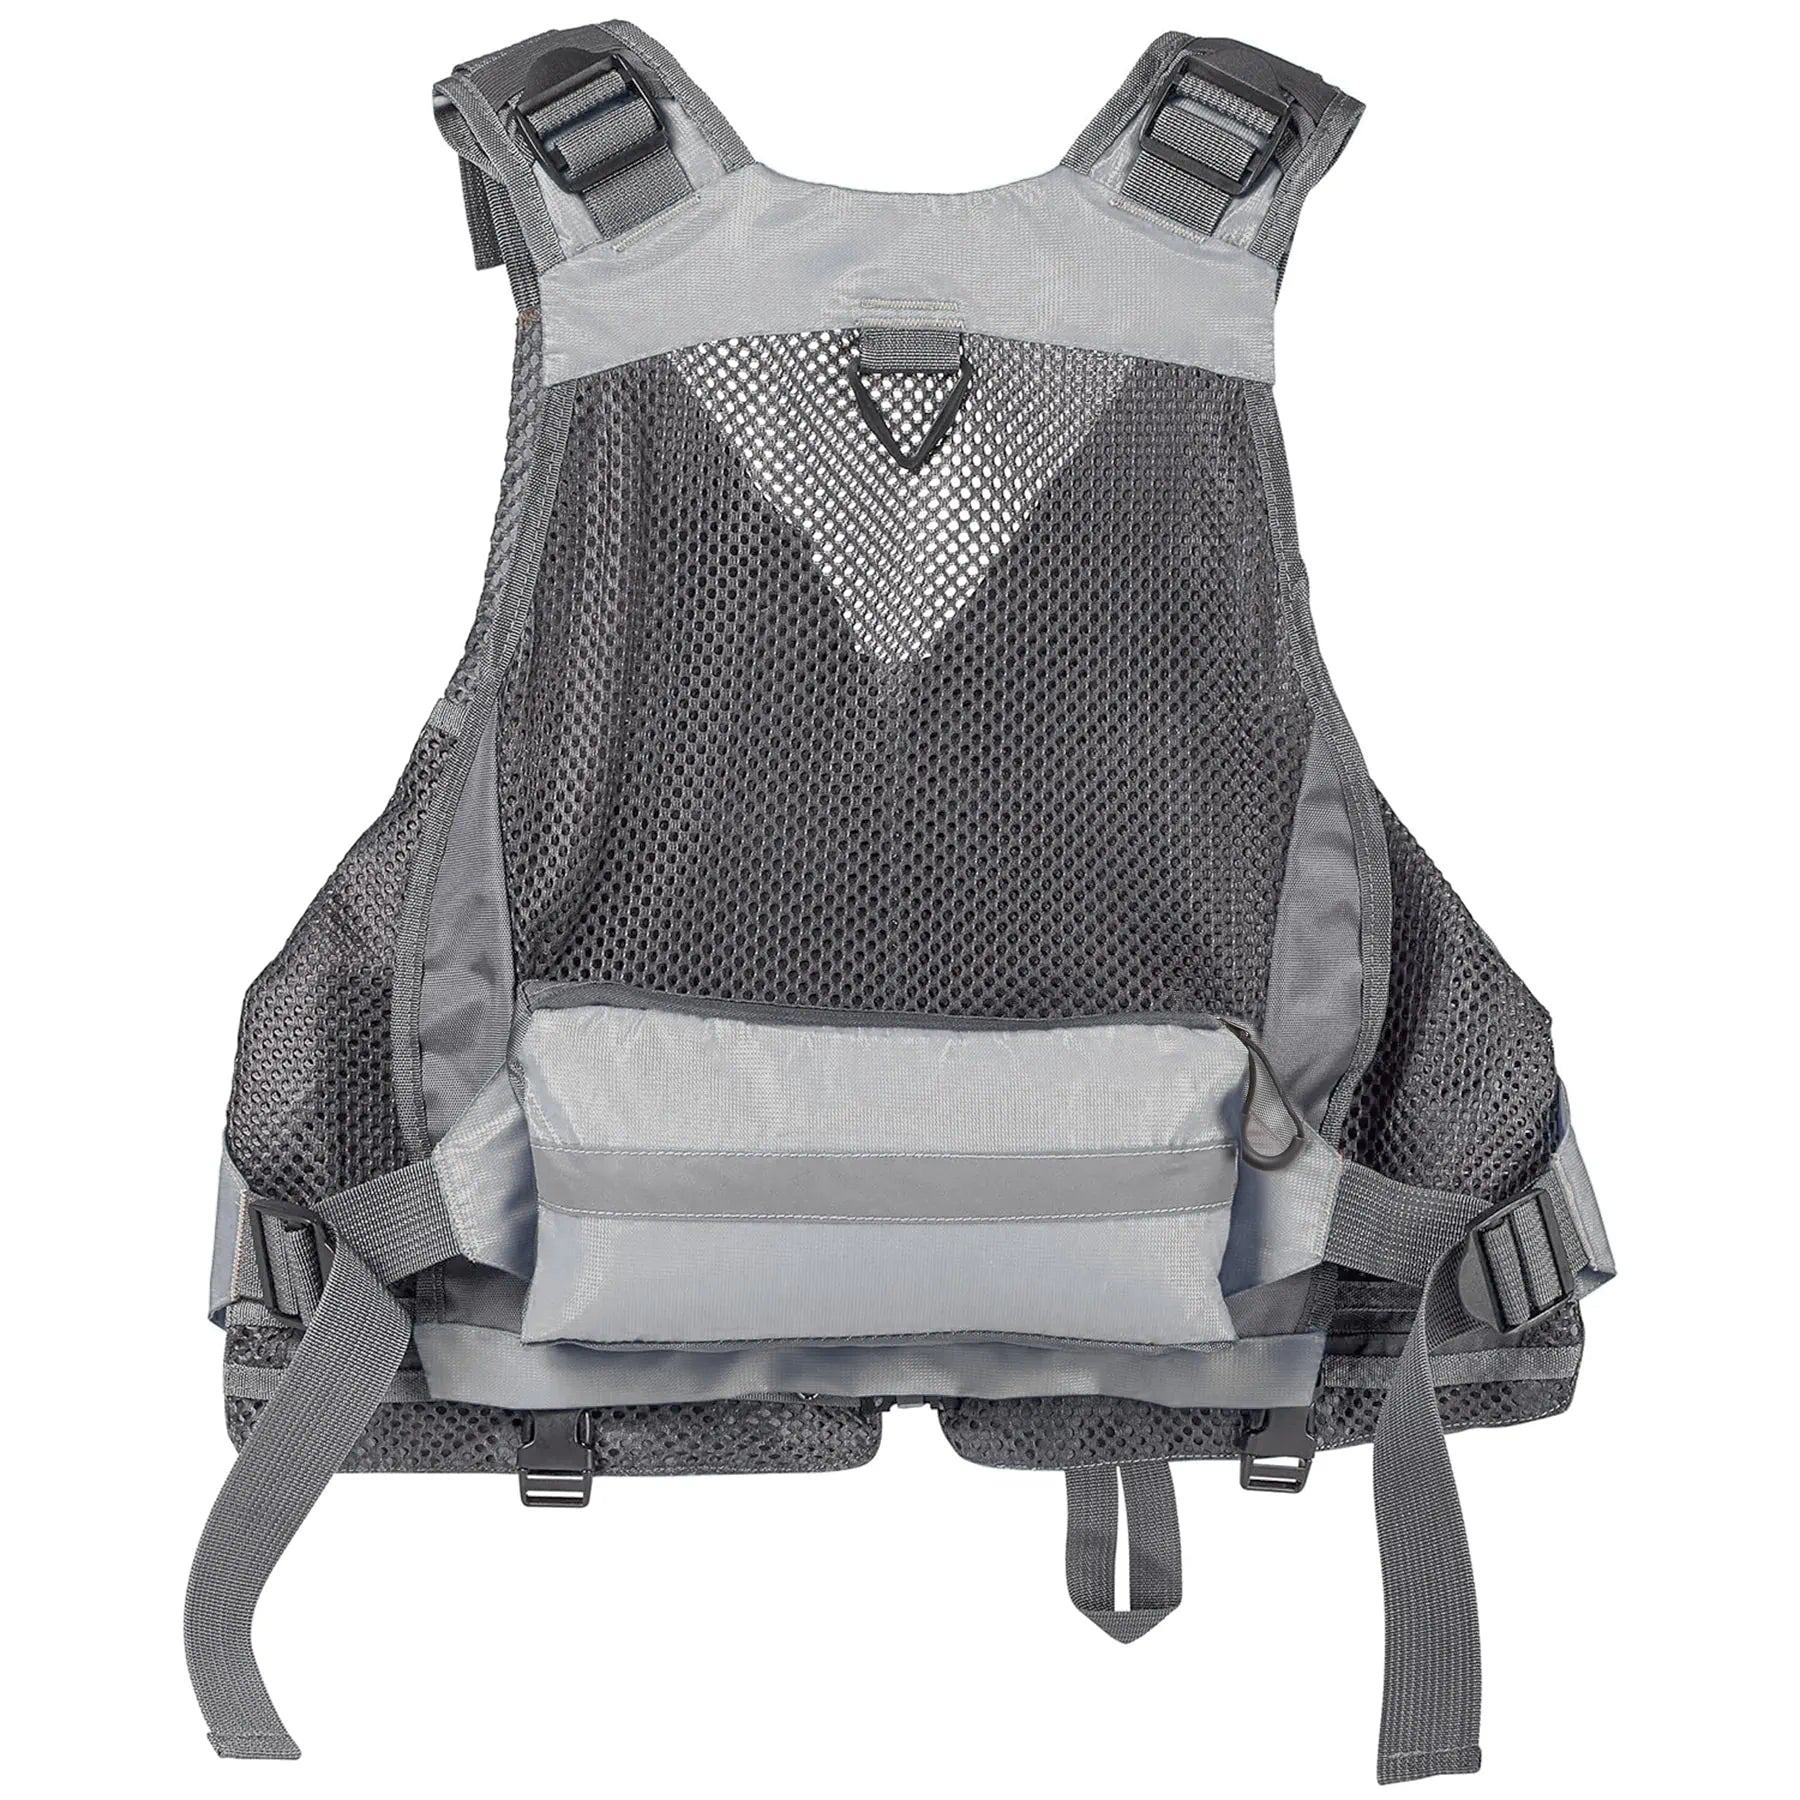 Maxcatch Fly Fishing Backpack Adjustable Size Mesh Fishing Vest Pack